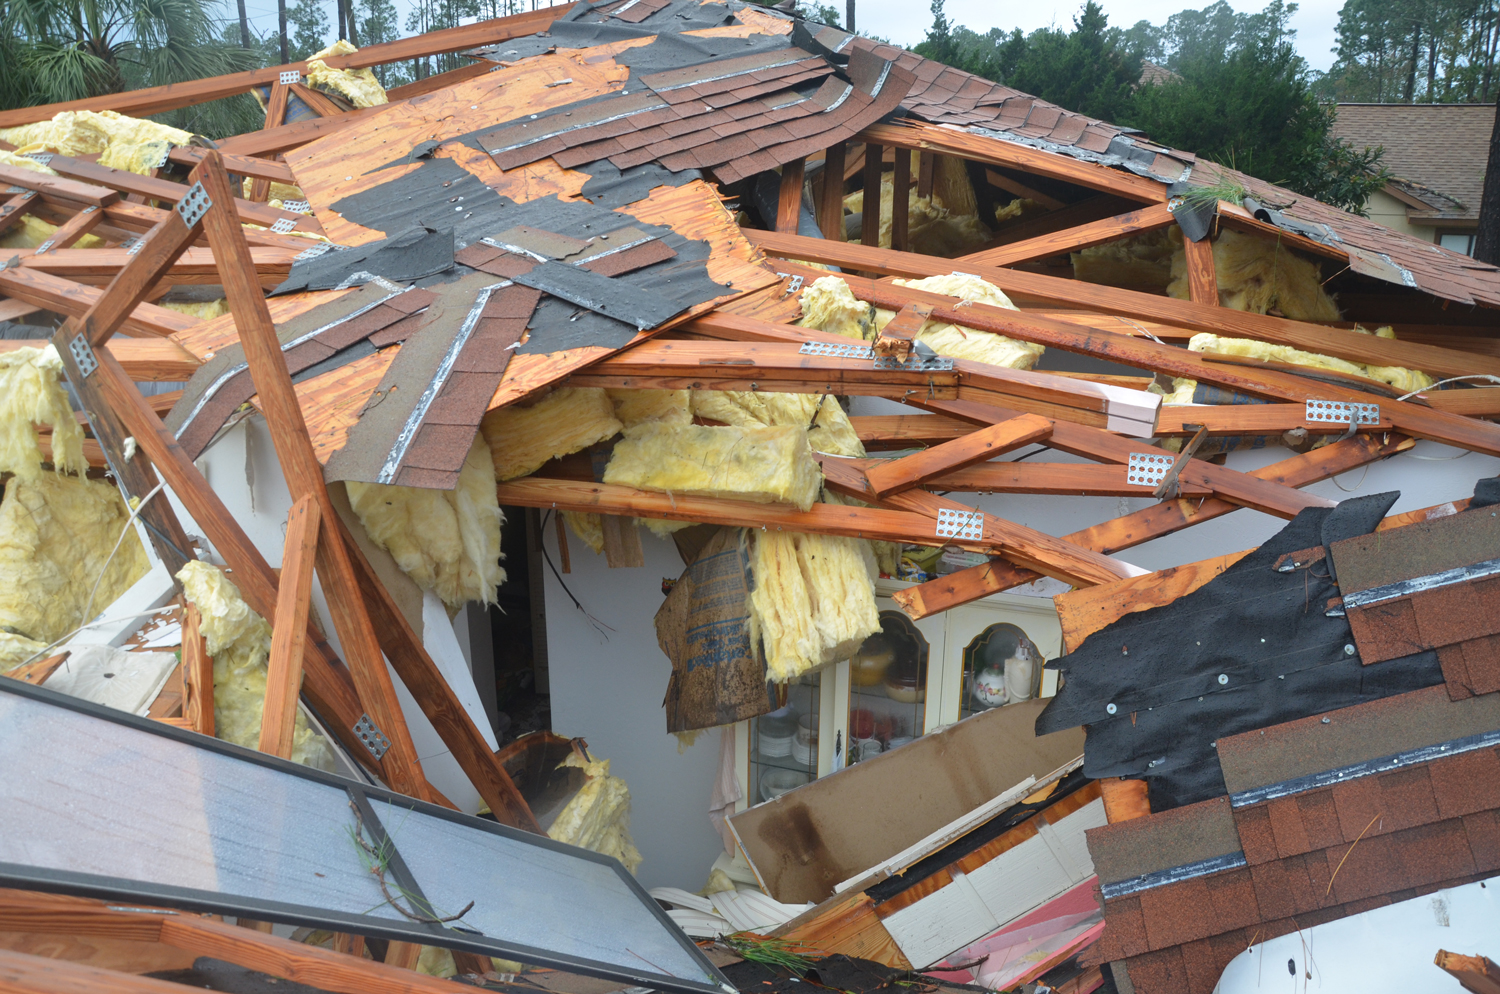 A house on Palm Coast's Barrenwrood Lane and Bayside Drive after the December 2013 tornado. (© FlaglerLive)